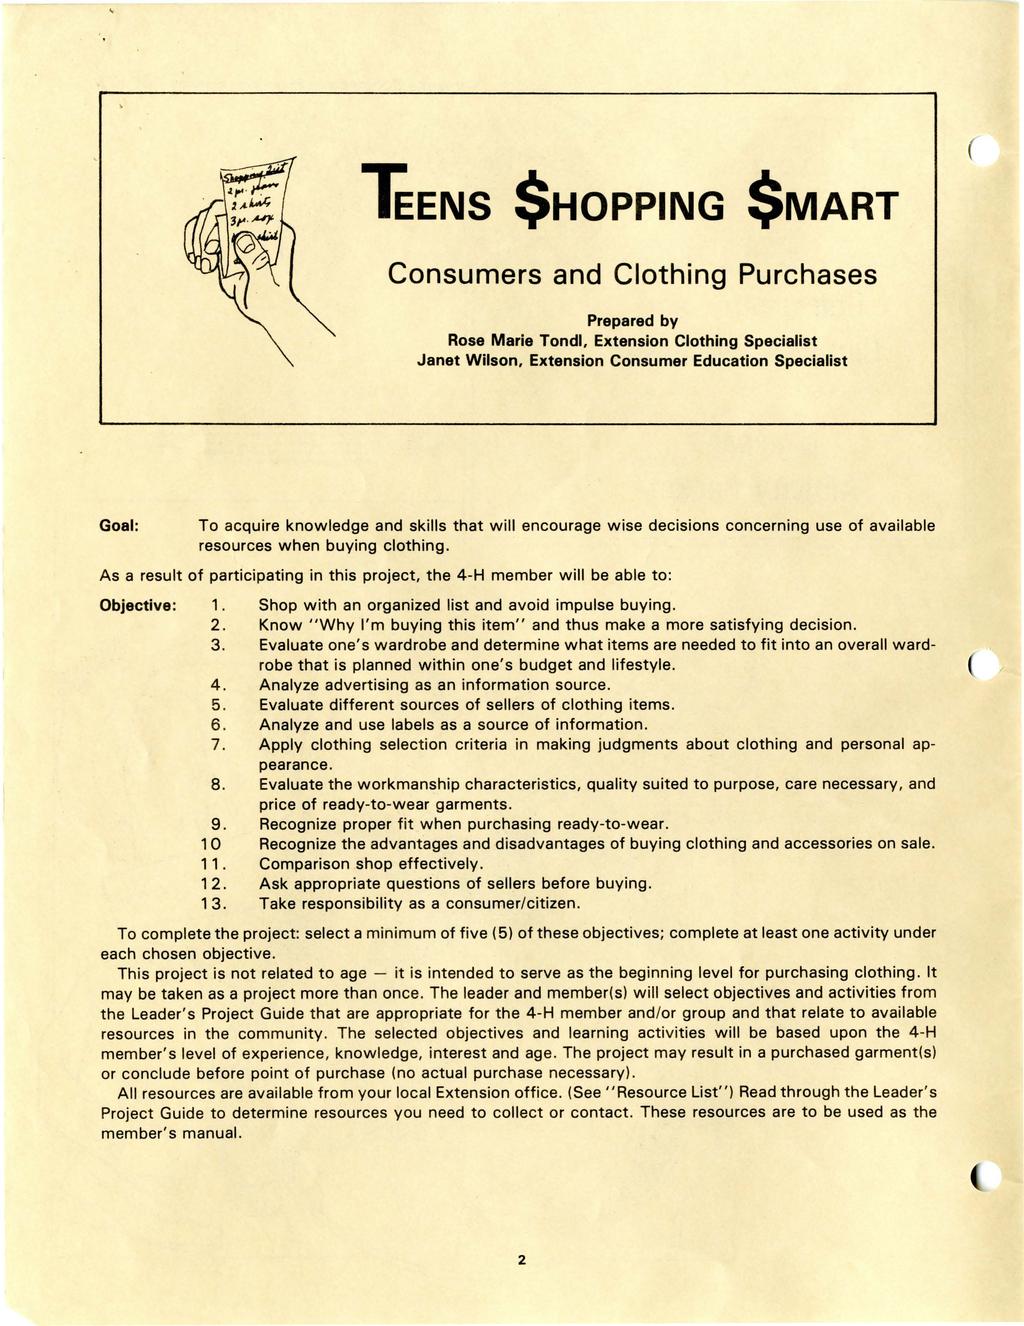 ( leens $HOPPING $MART Consumers and Clothing Purchases Prepared by Rose Marie Tondl. Extension Clothing Specialist Janet Wilson.